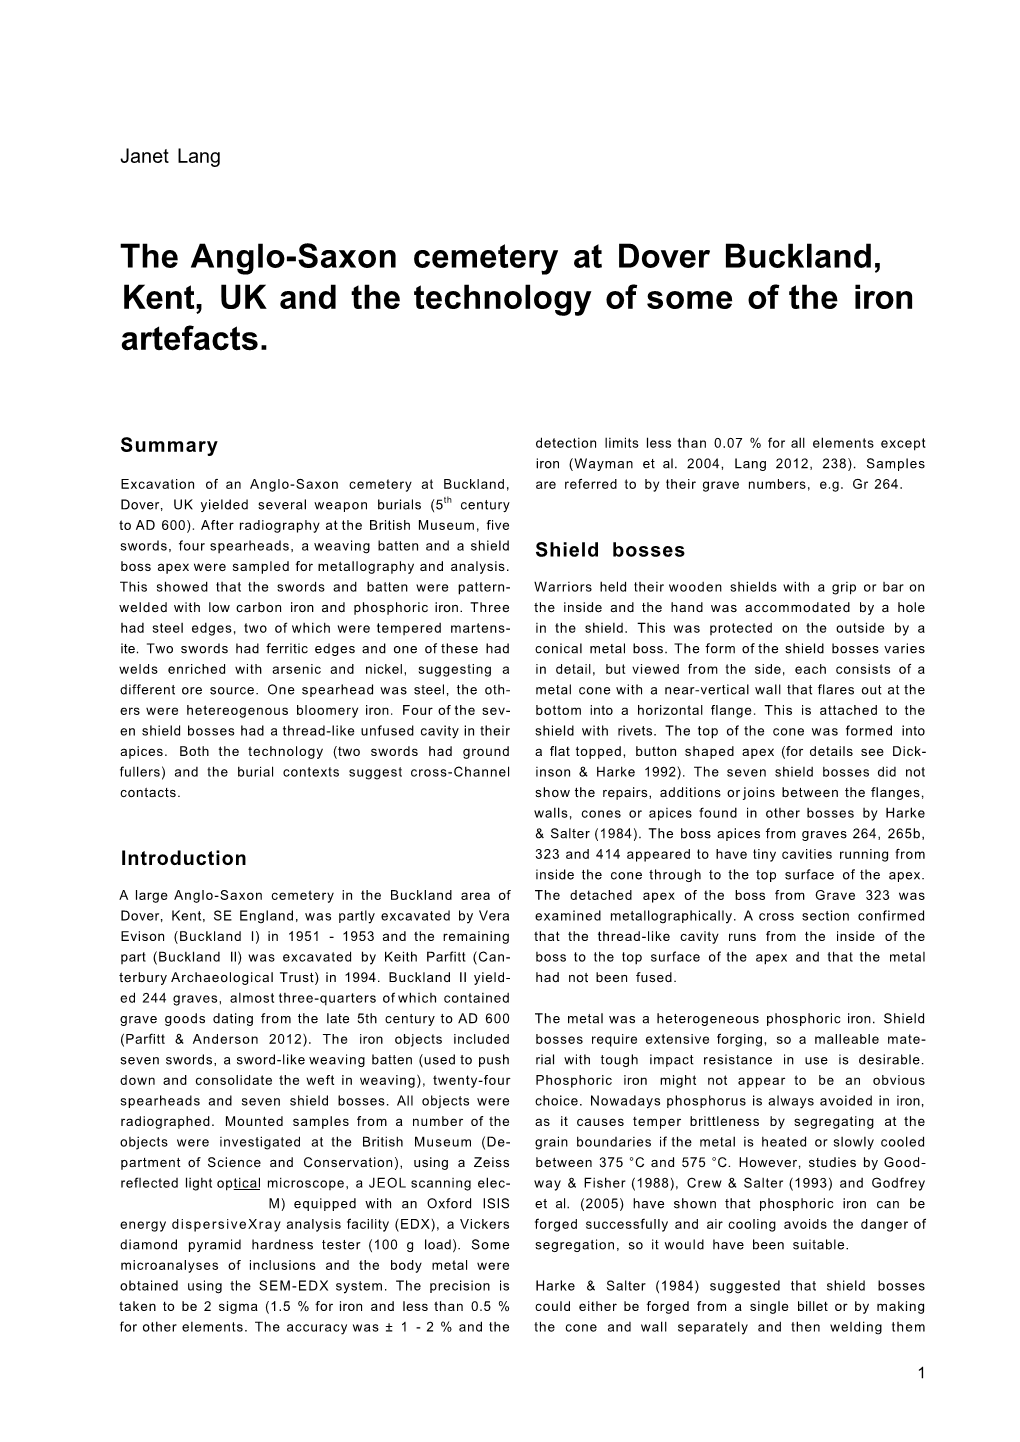 The Anglo-Saxon Cemetery at Dover Buckland, Kent, UK and the Technology of Some of the Iron Artefacts